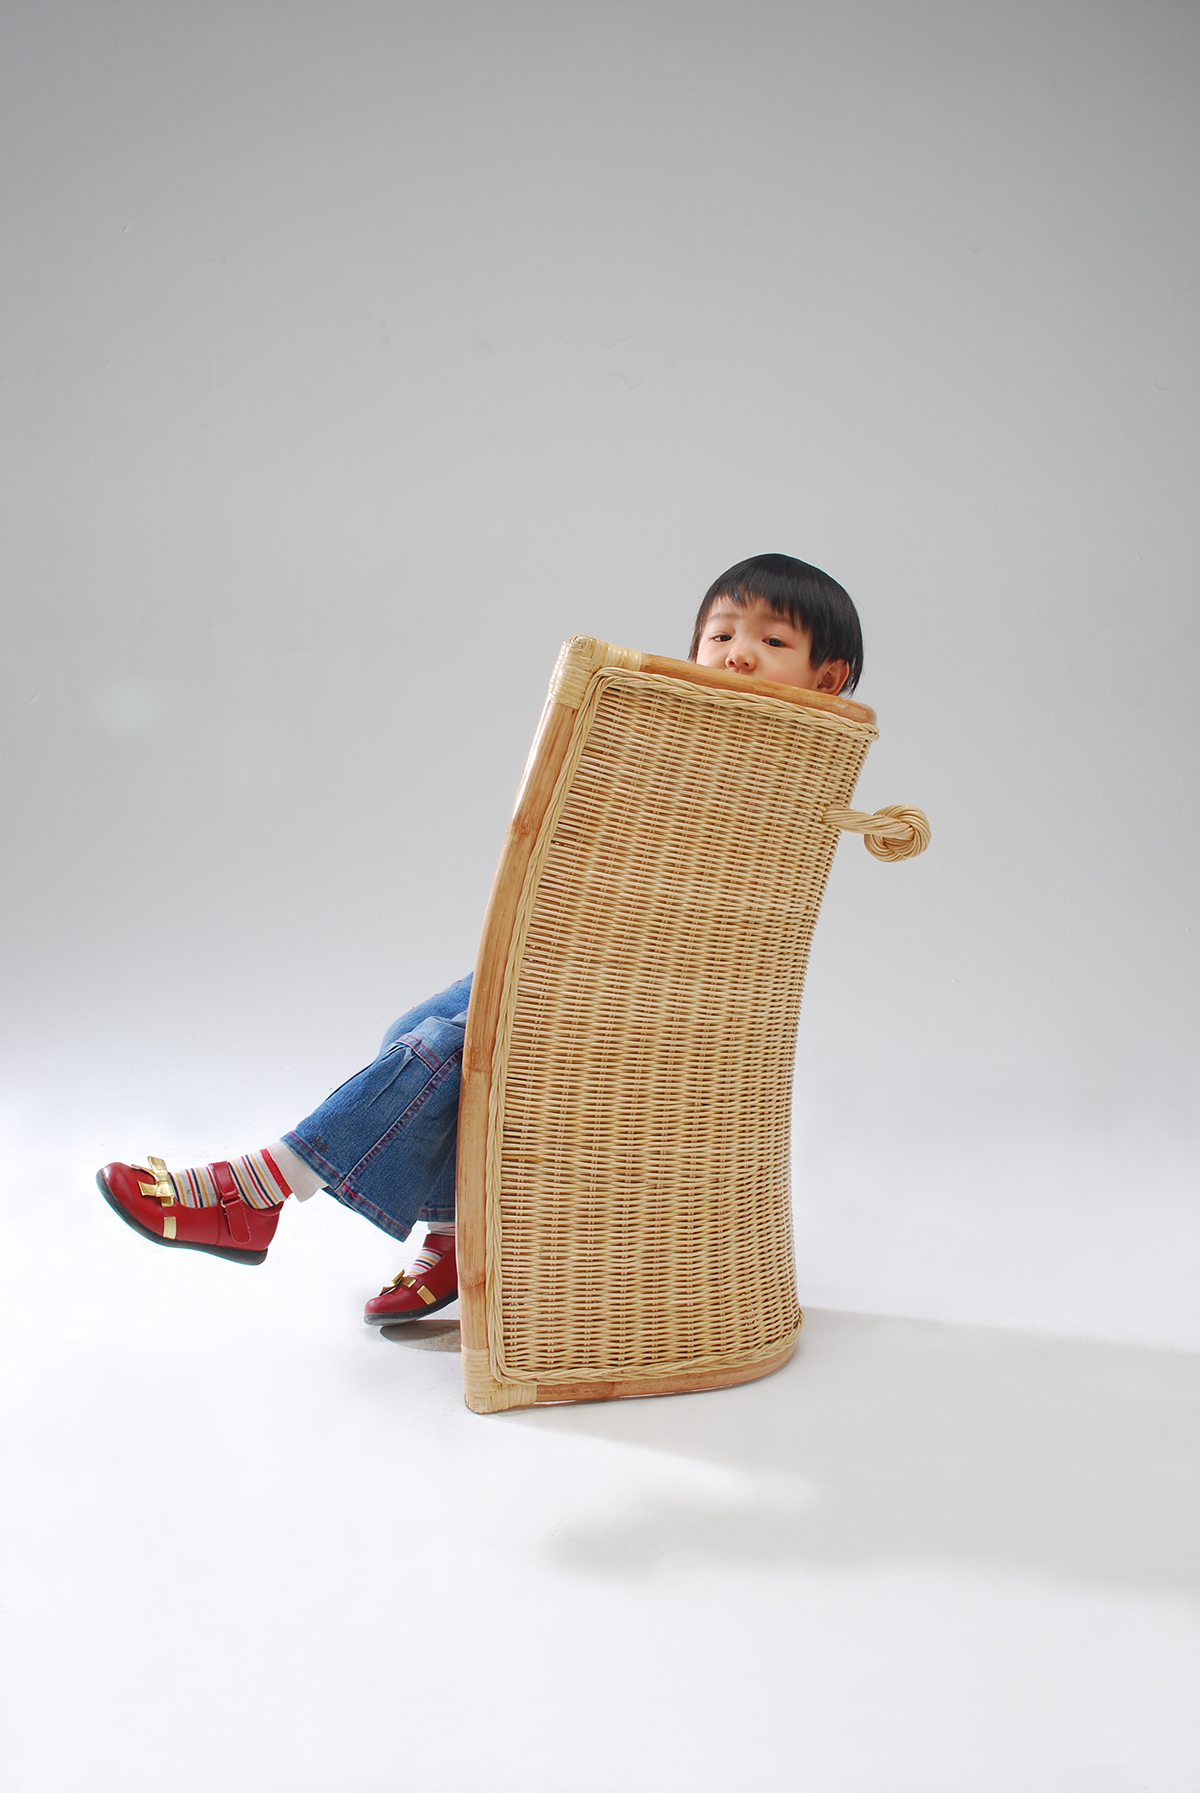 chair Multi- functional Playful interaction furniture